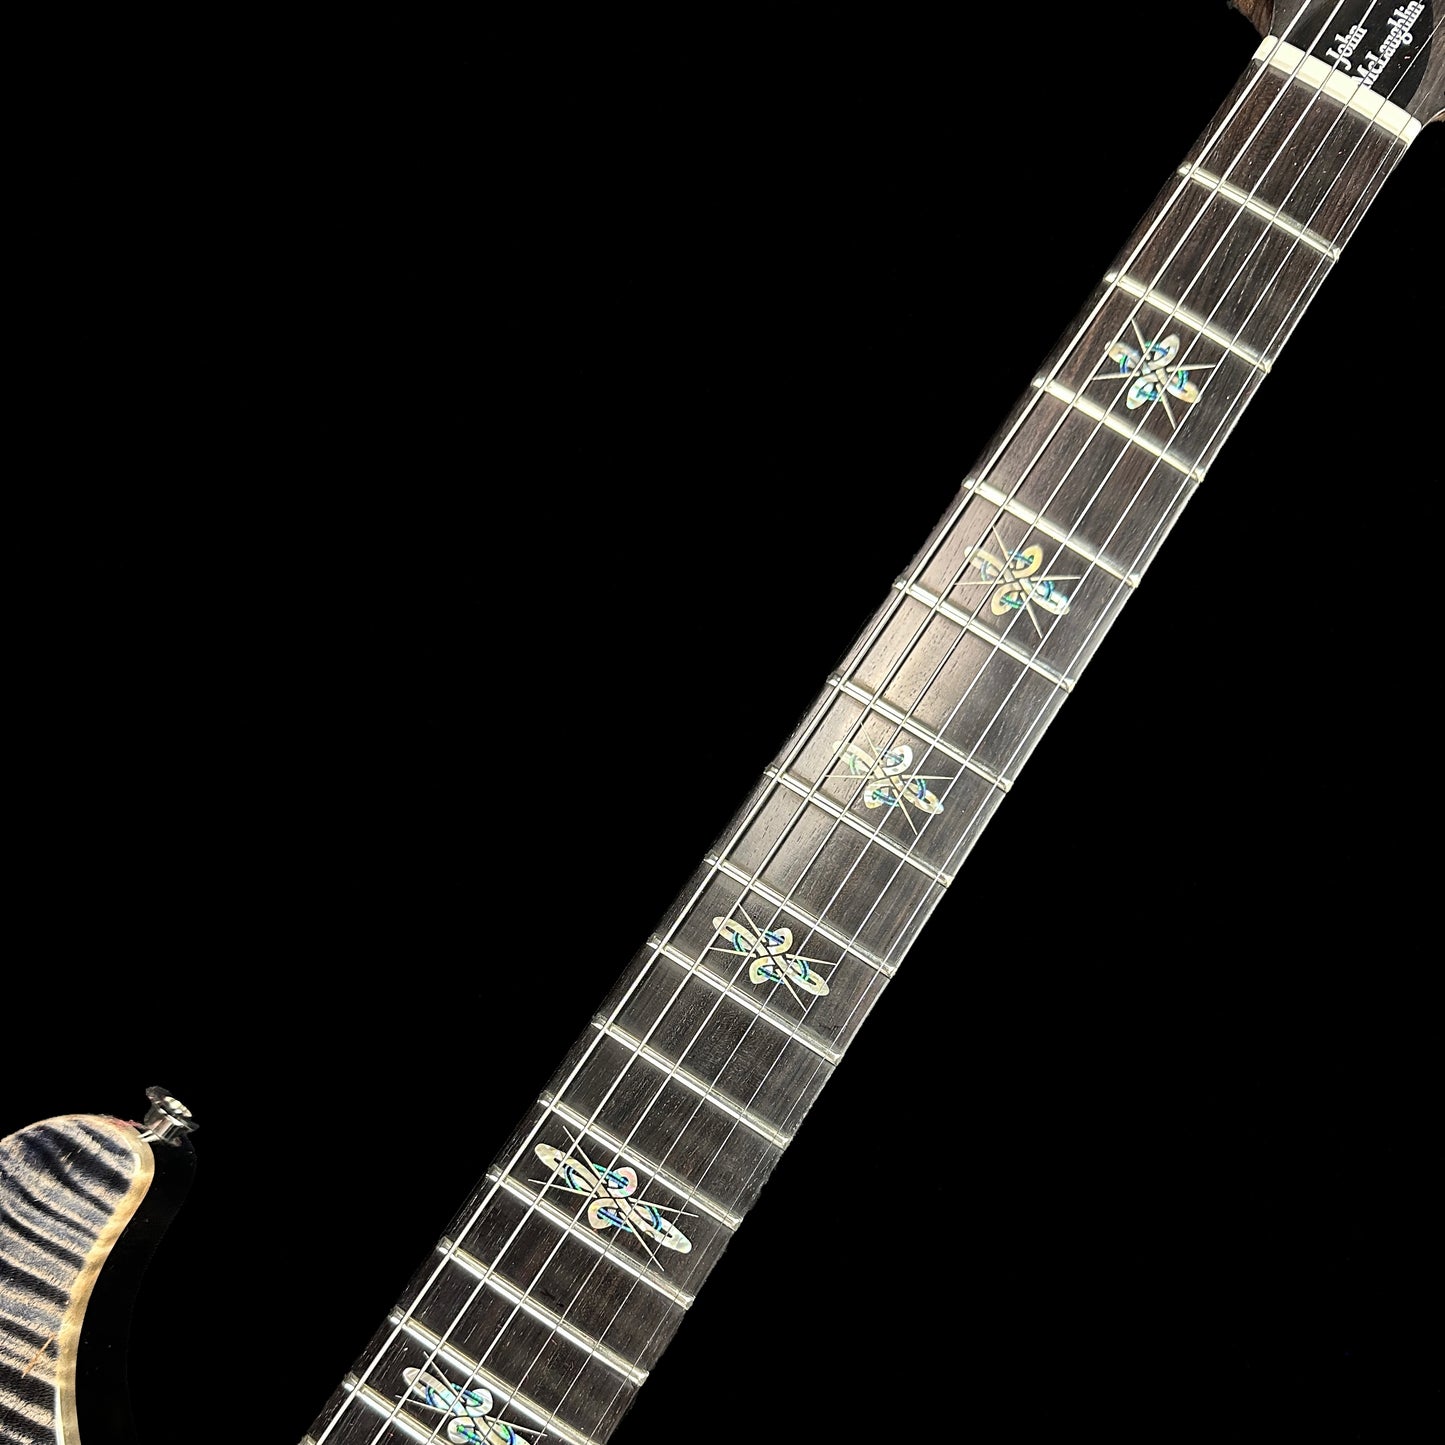 Fretboard of PRS Private Stock John McLaughlin Limited Edition.